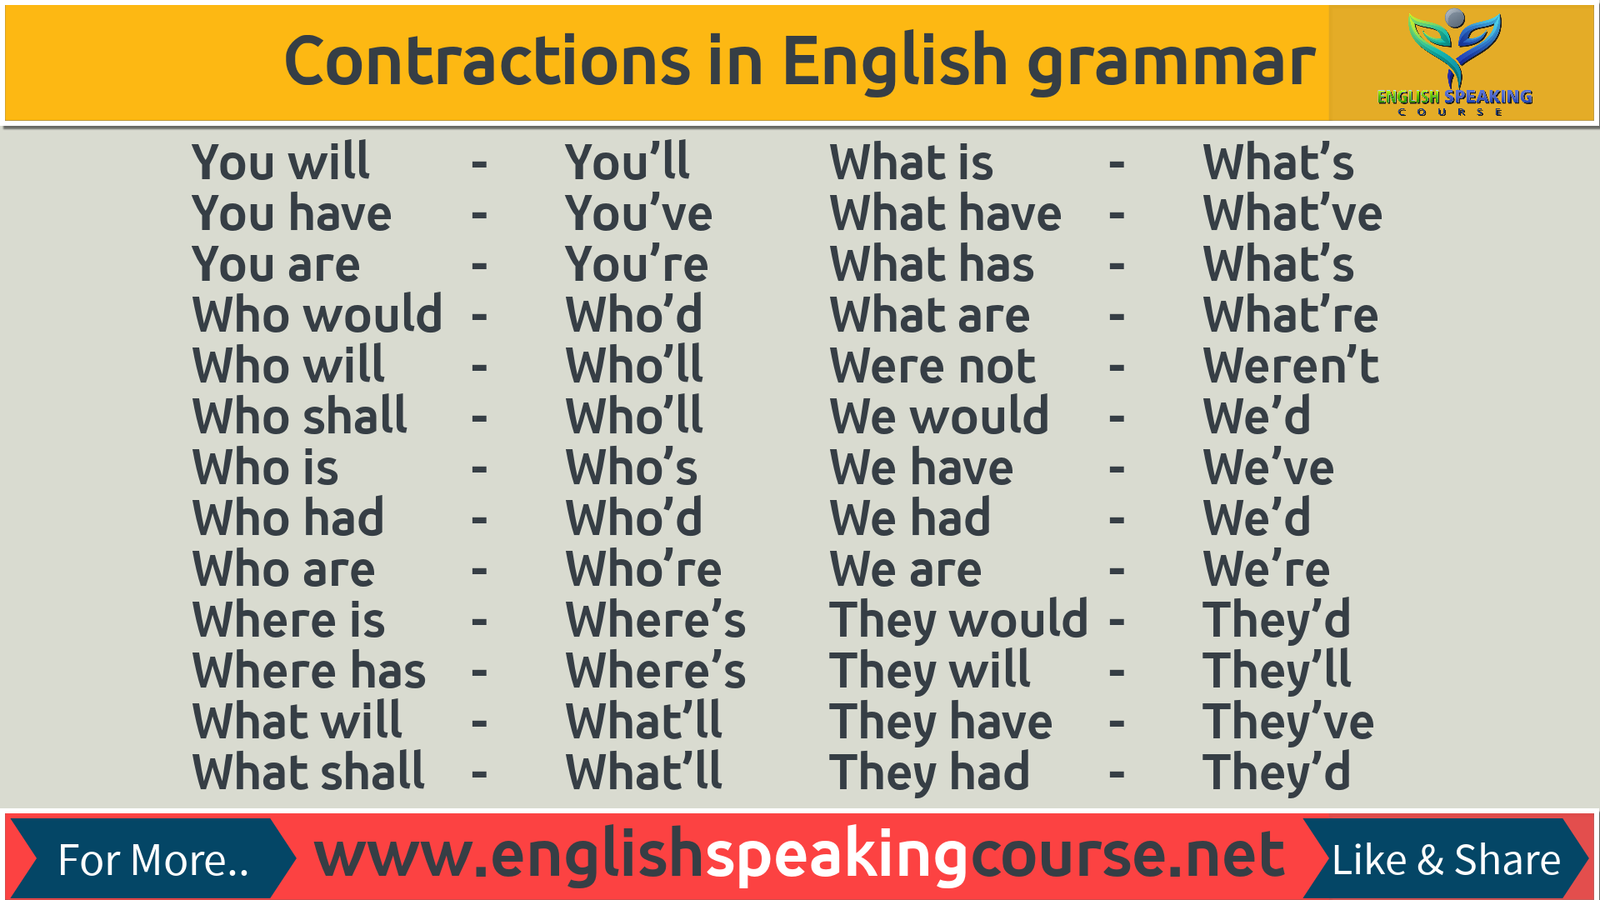 Contractions in English grammar with examples